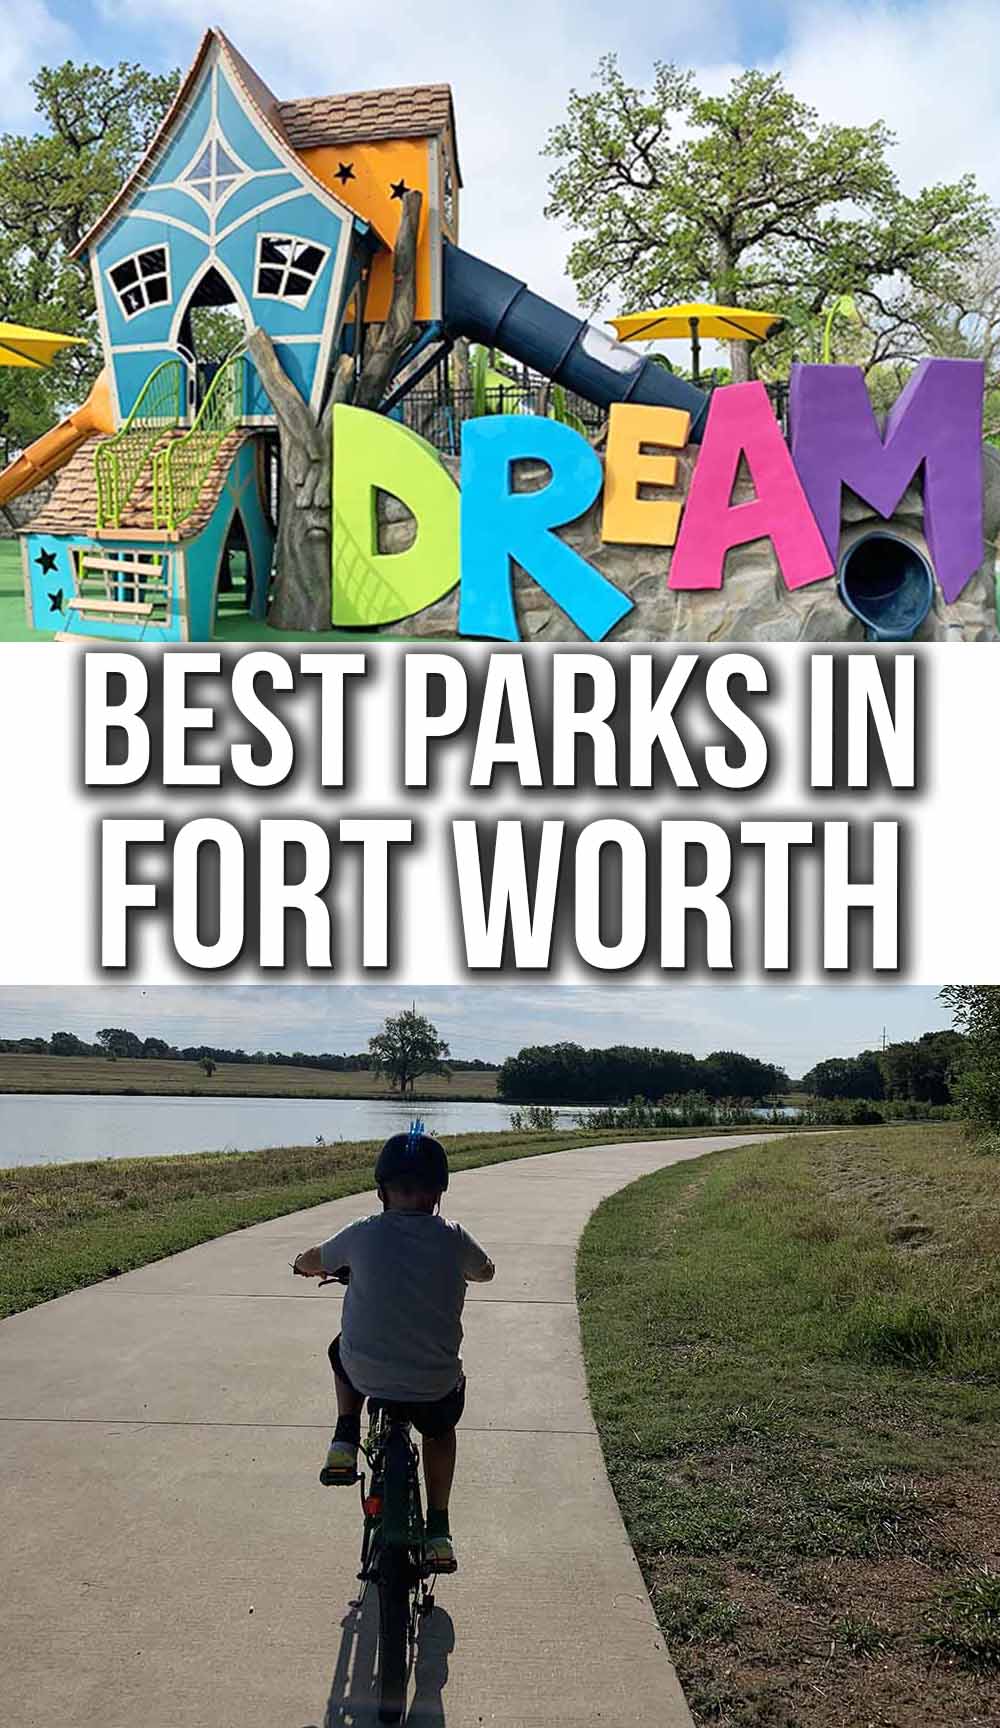 Best Parks in Fort Worth